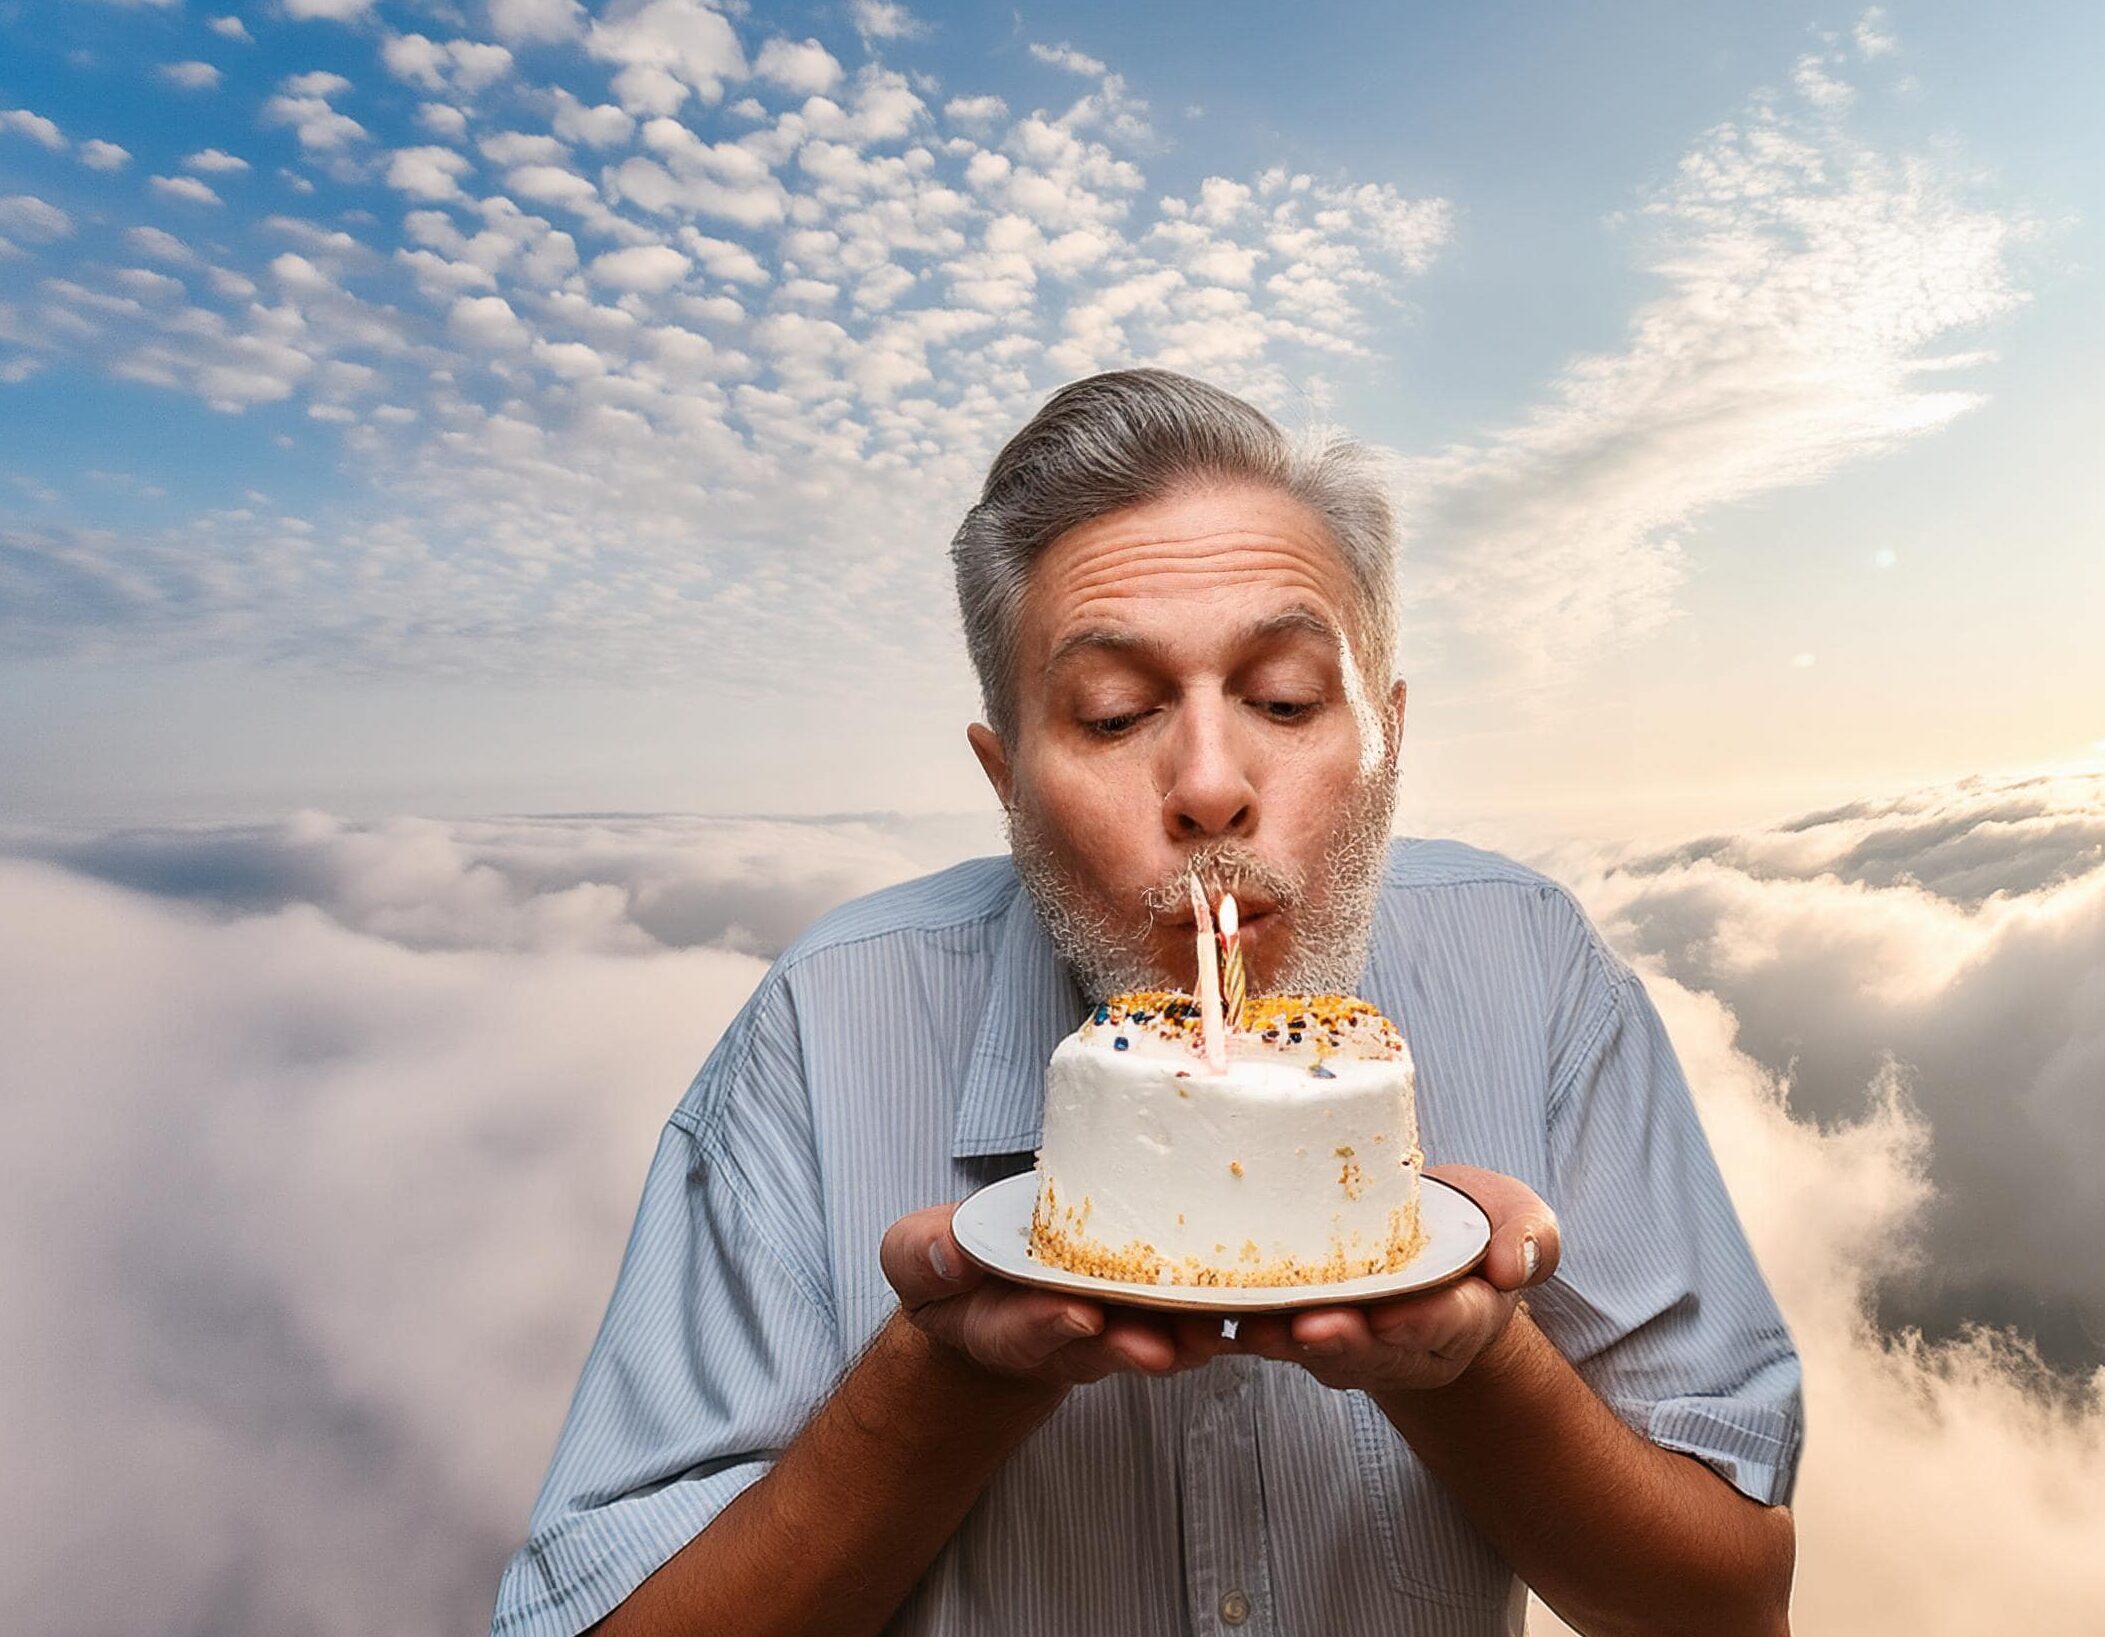 Firefly An old German male gentely blowing a birthday cake in a corner in heaven surrounded by cloud min edited